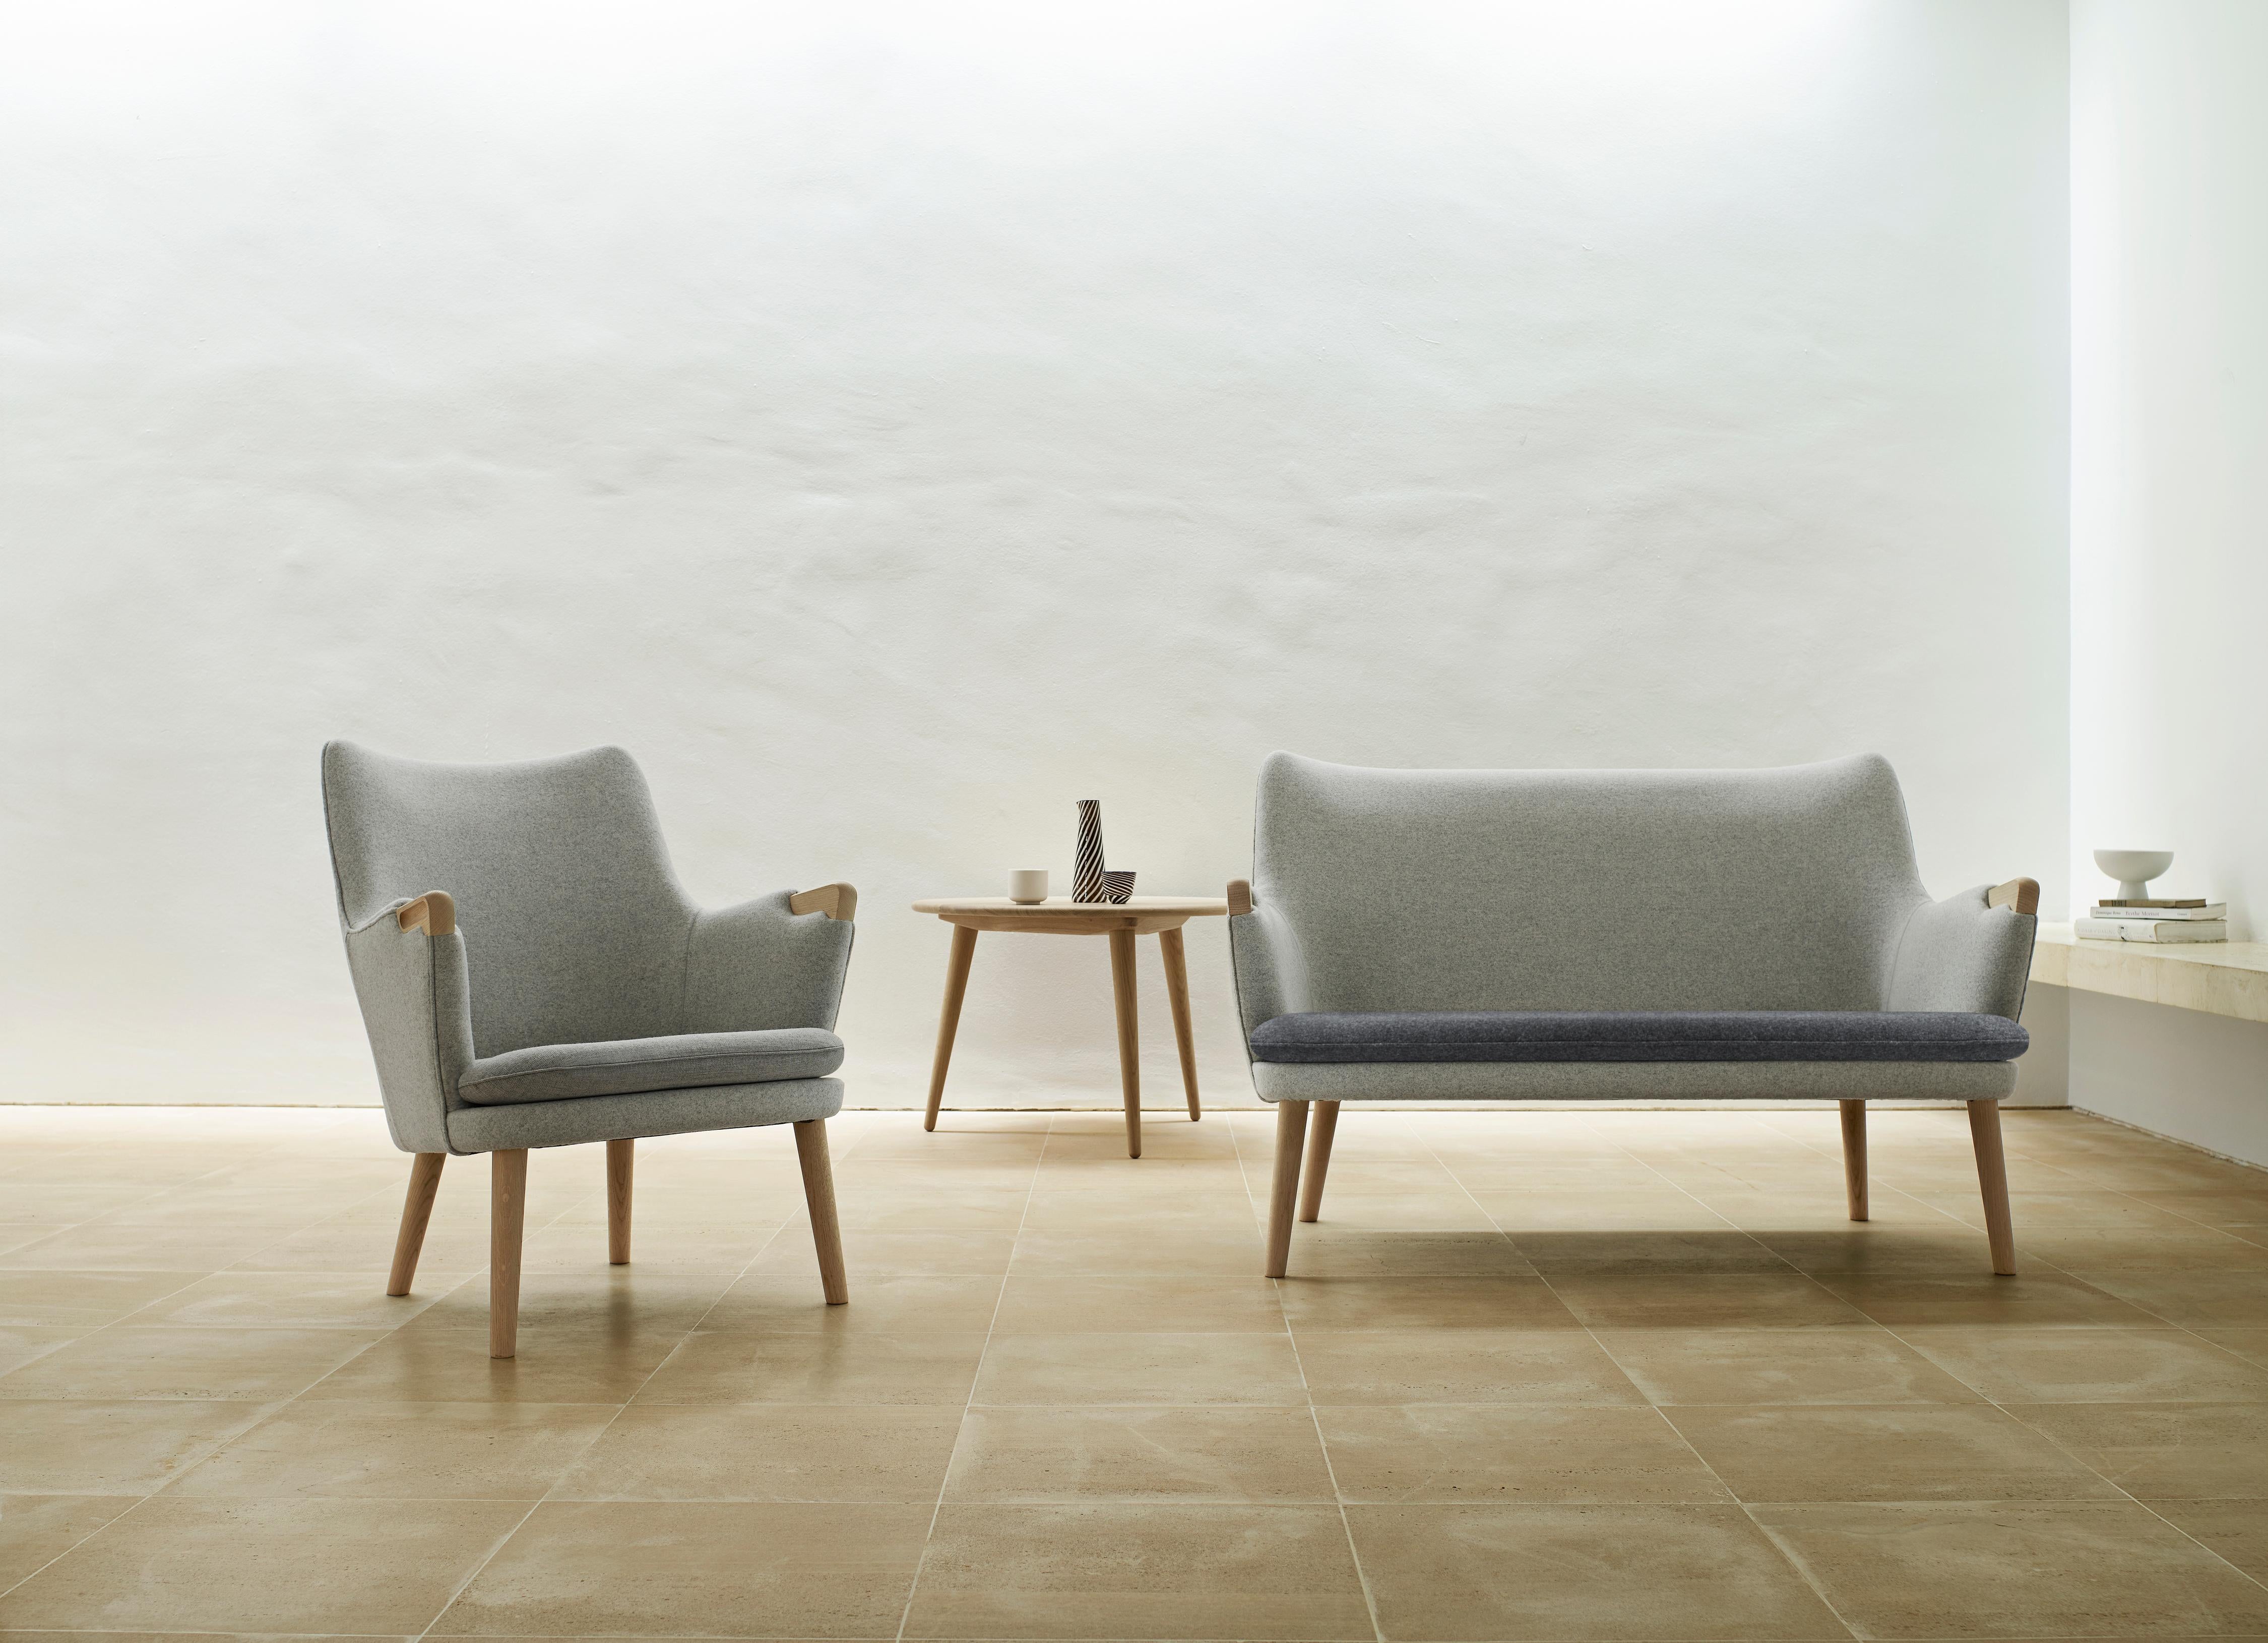 With its slender frame and flowing, sculptural form, Hans J. Wegner’s CH71 lounge chair is a testament to the legendary Danish designer’s unique understanding of woodworking and upholstery. Created in 1952, the design shows all the hallmarks of the